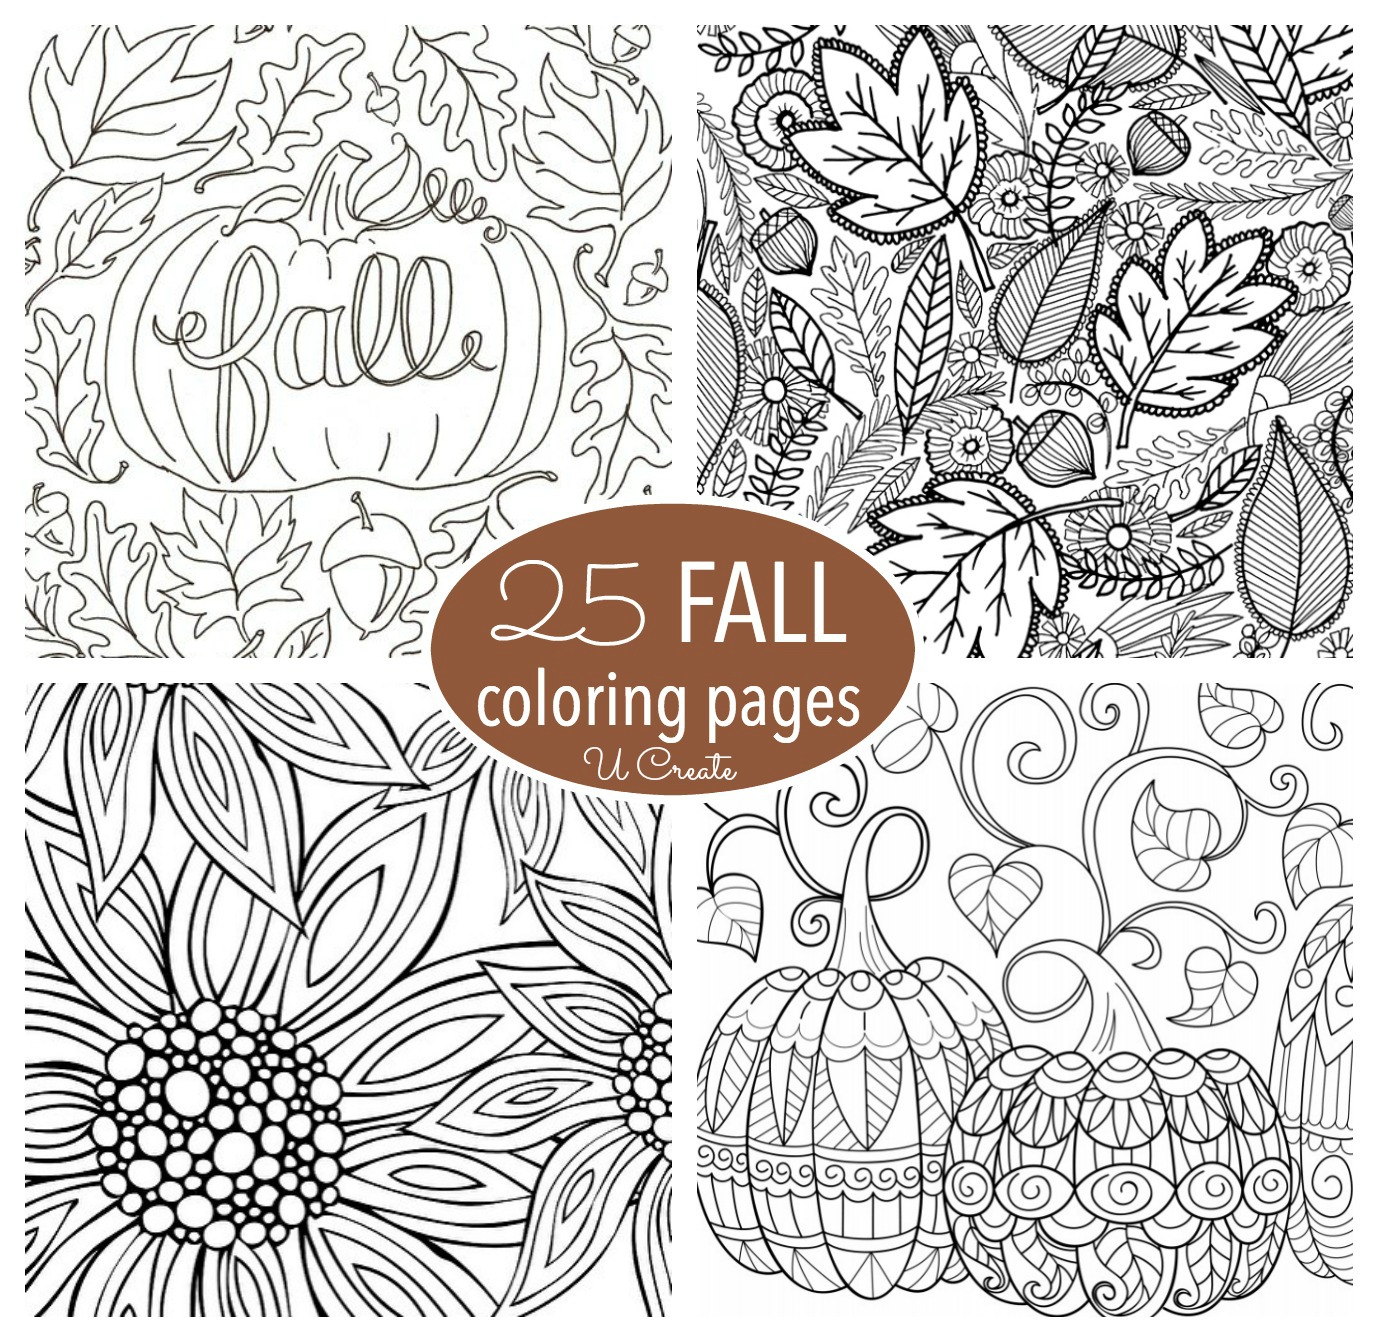 Free Halloween Adult Coloring Pages - U Create